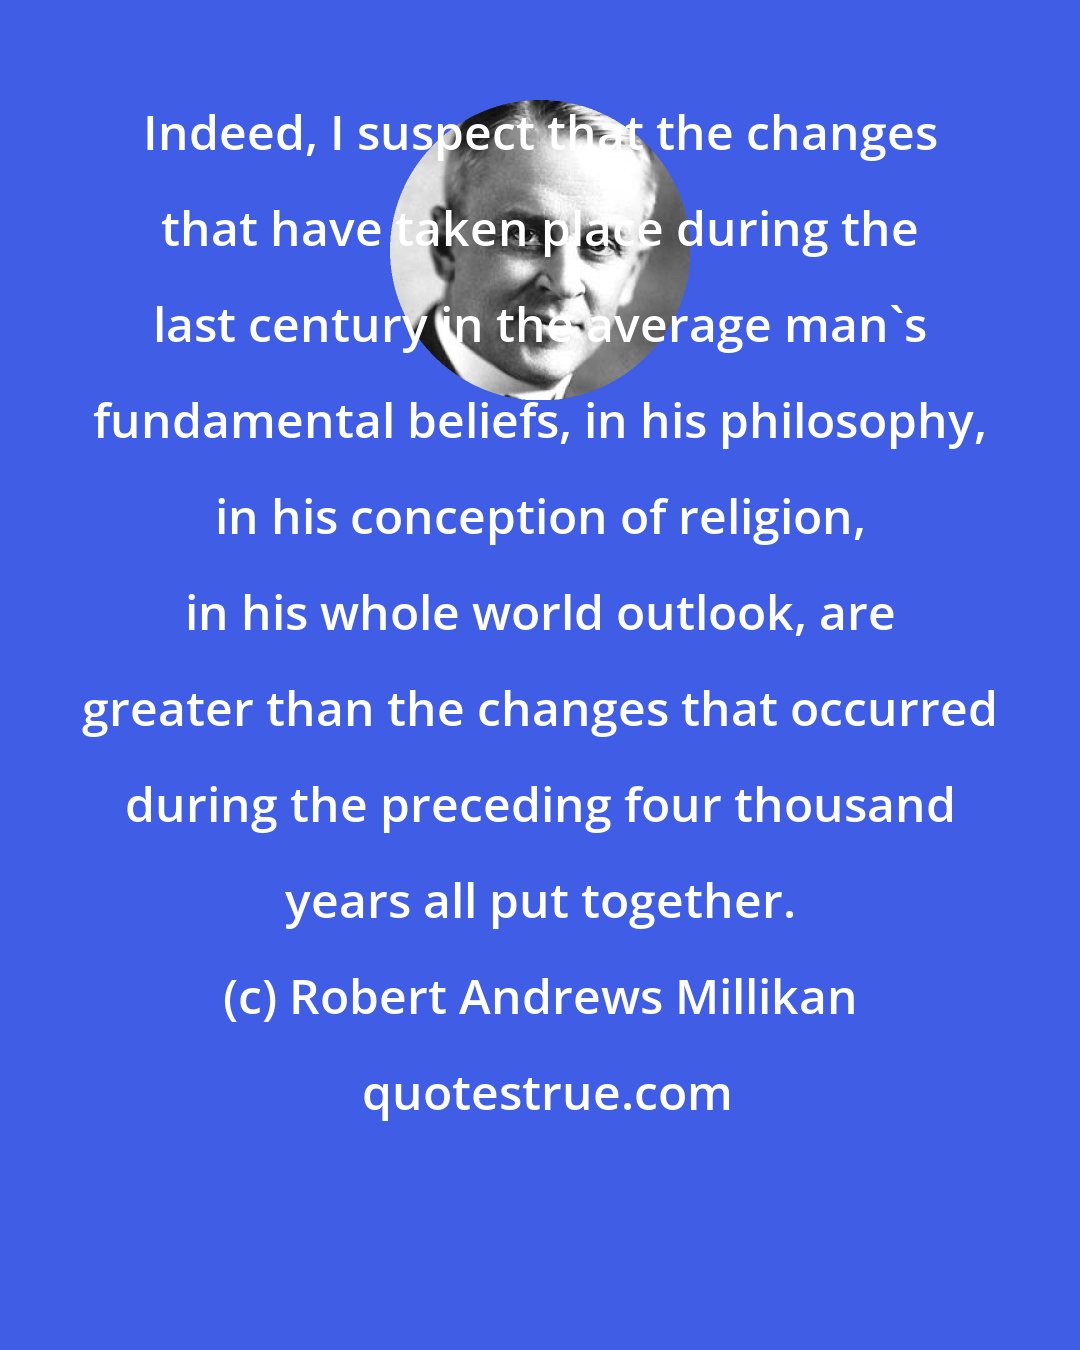 Robert Andrews Millikan: Indeed, I suspect that the changes that have taken place during the last century in the average man's fundamental beliefs, in his philosophy, in his conception of religion, in his whole world outlook, are greater than the changes that occurred during the preceding four thousand years all put together.